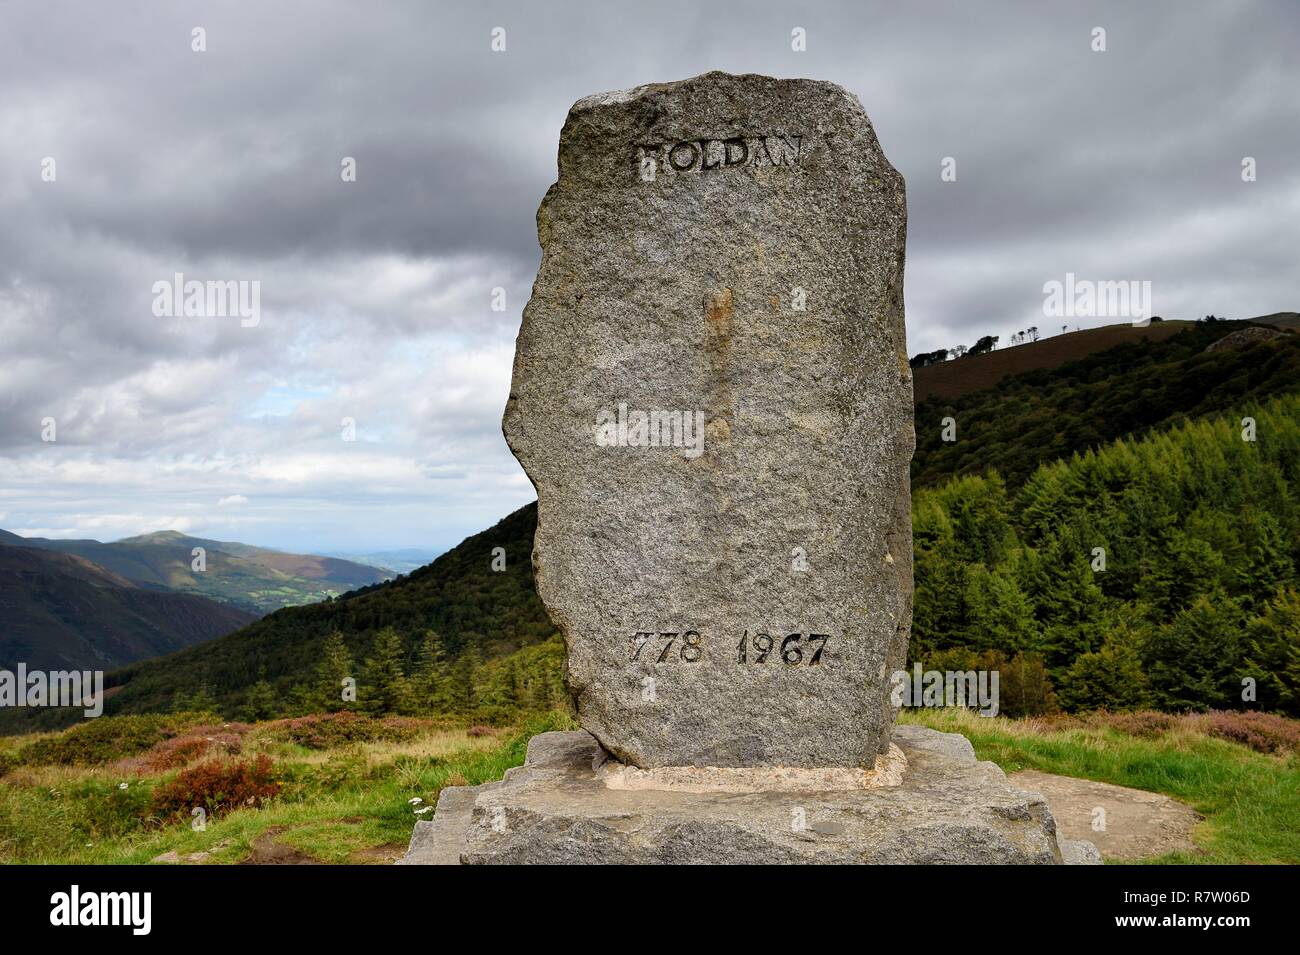 Spain, Basque Country, Navarra, towards Roncevaux, Camino de Santiago (the Way of St. James), monolith in honor of the legendary battle of Roncesvalles called stele of Roland at the Roncesvalles pass (also Ibaneta pass) Stock Photo